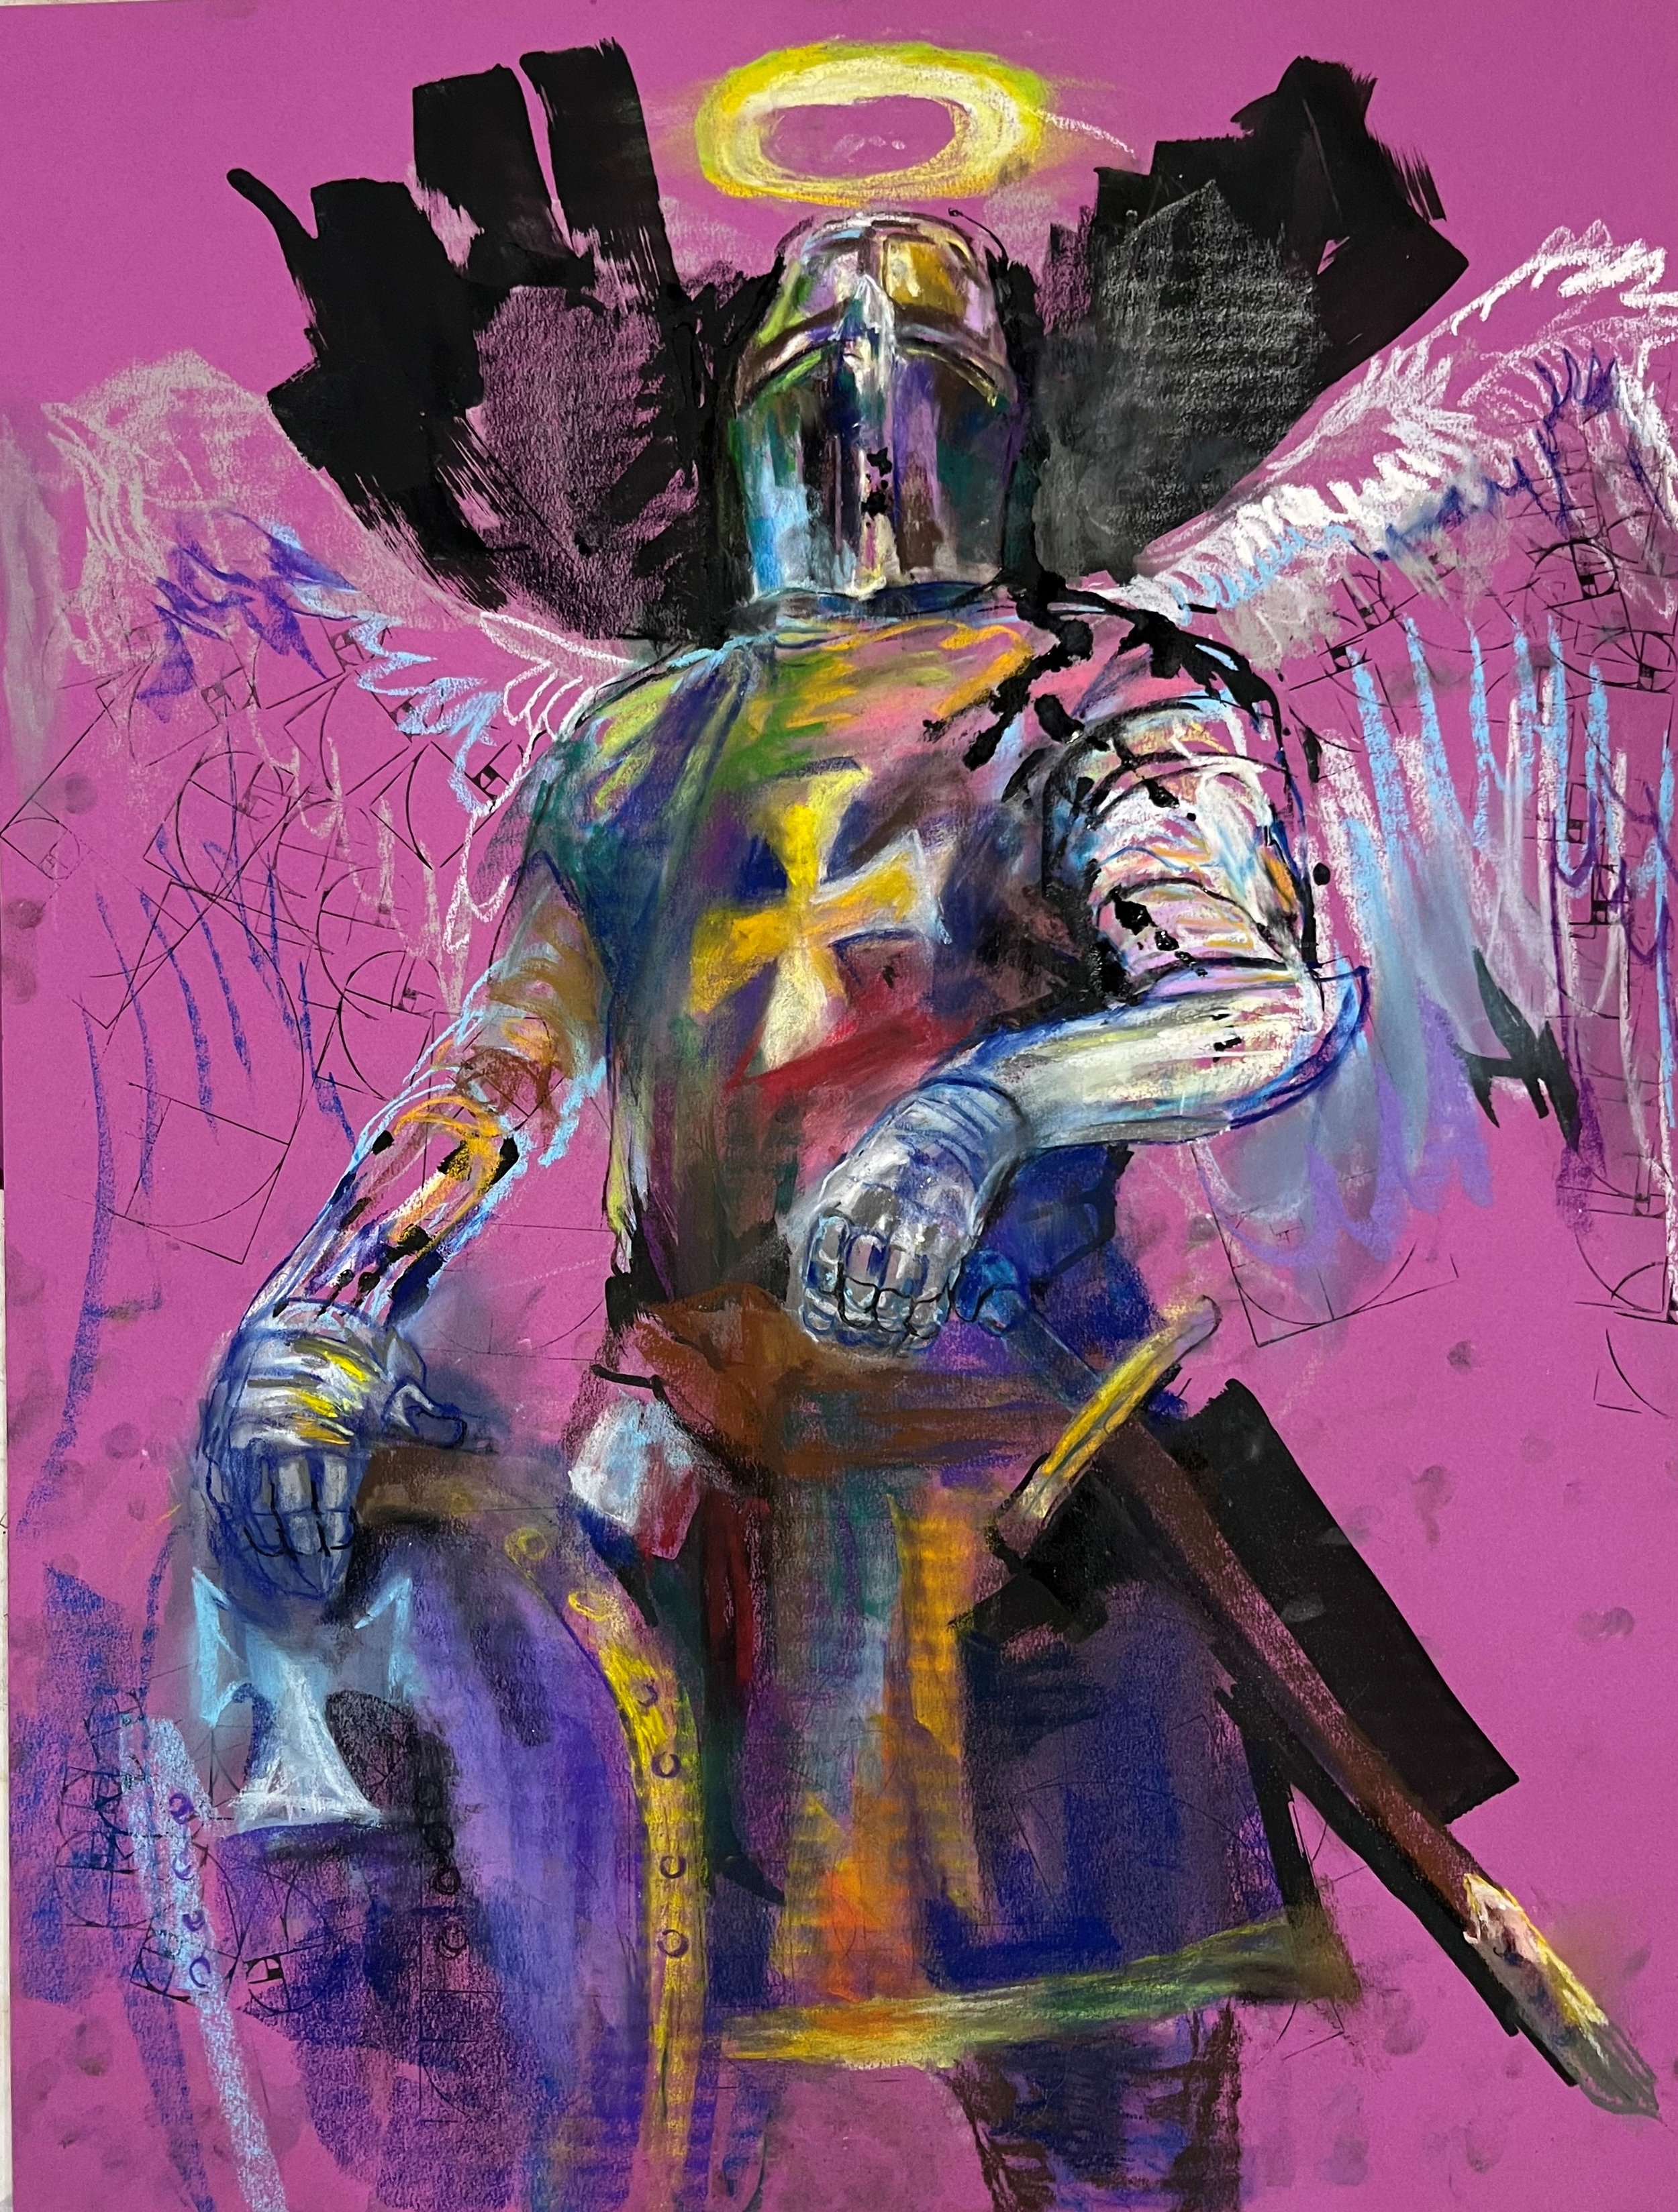 It's Time for an Art Crusade